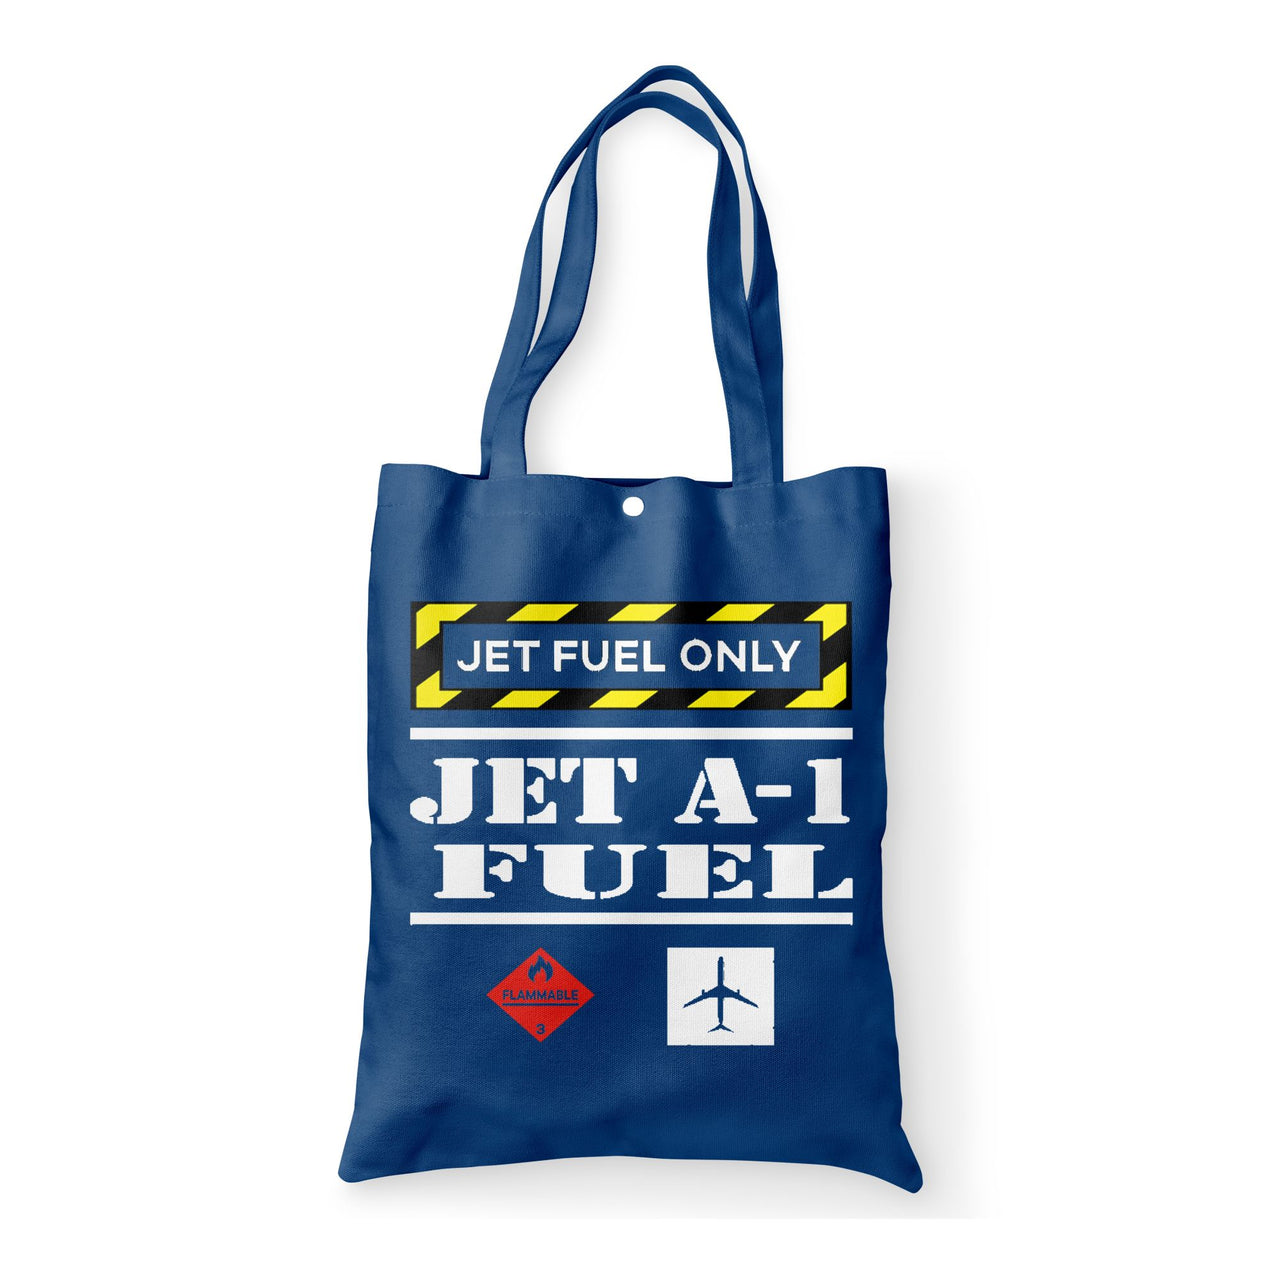 Jet Fuel Only Designed Tote Bags